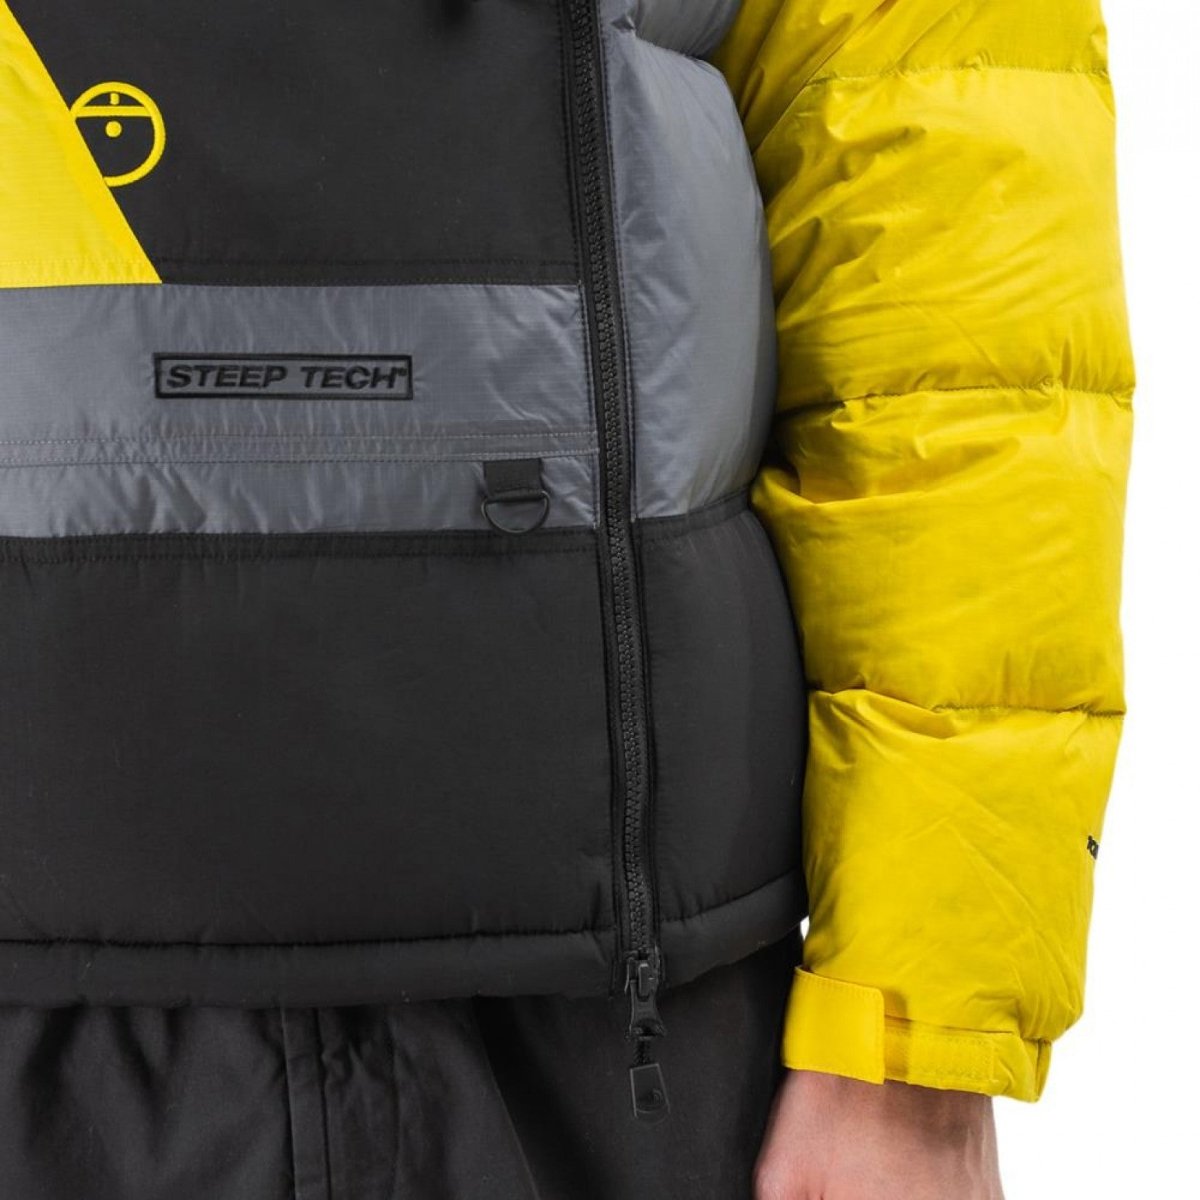 The North Face Steep Tech Down Jacket - Nf0a4qytsh31